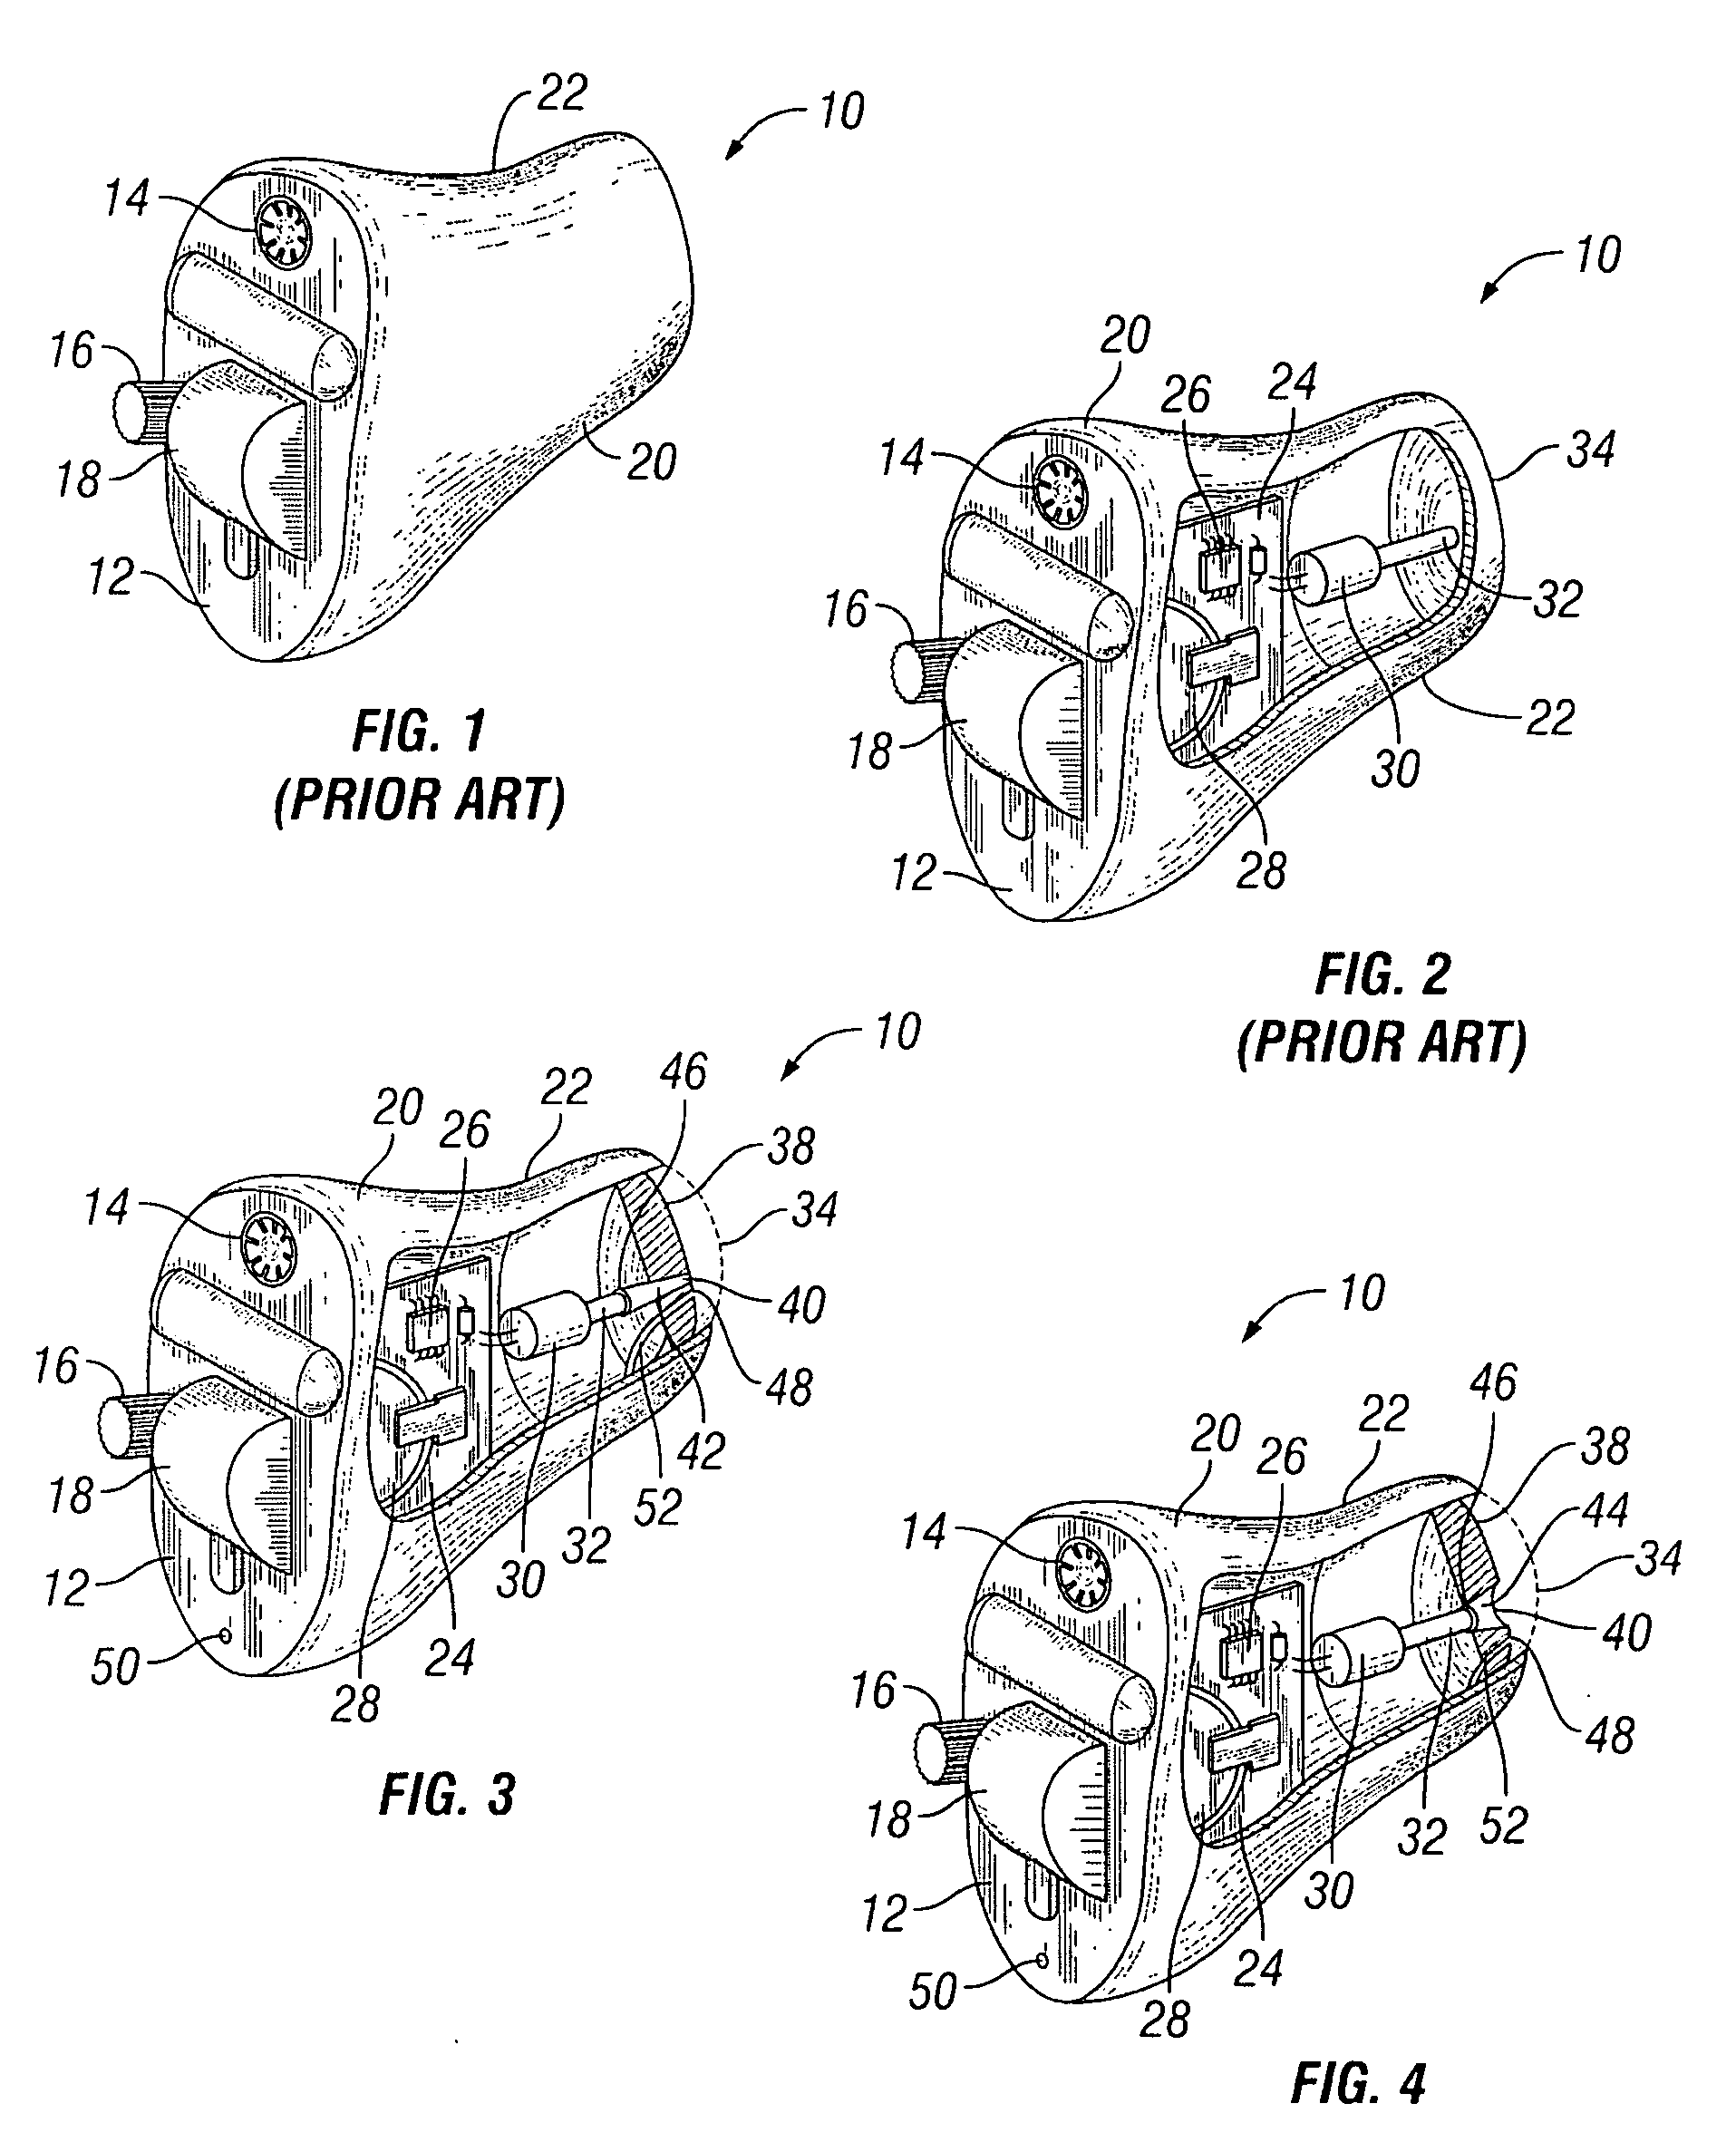 Acoustically tailored hearing aid and method of manufacture